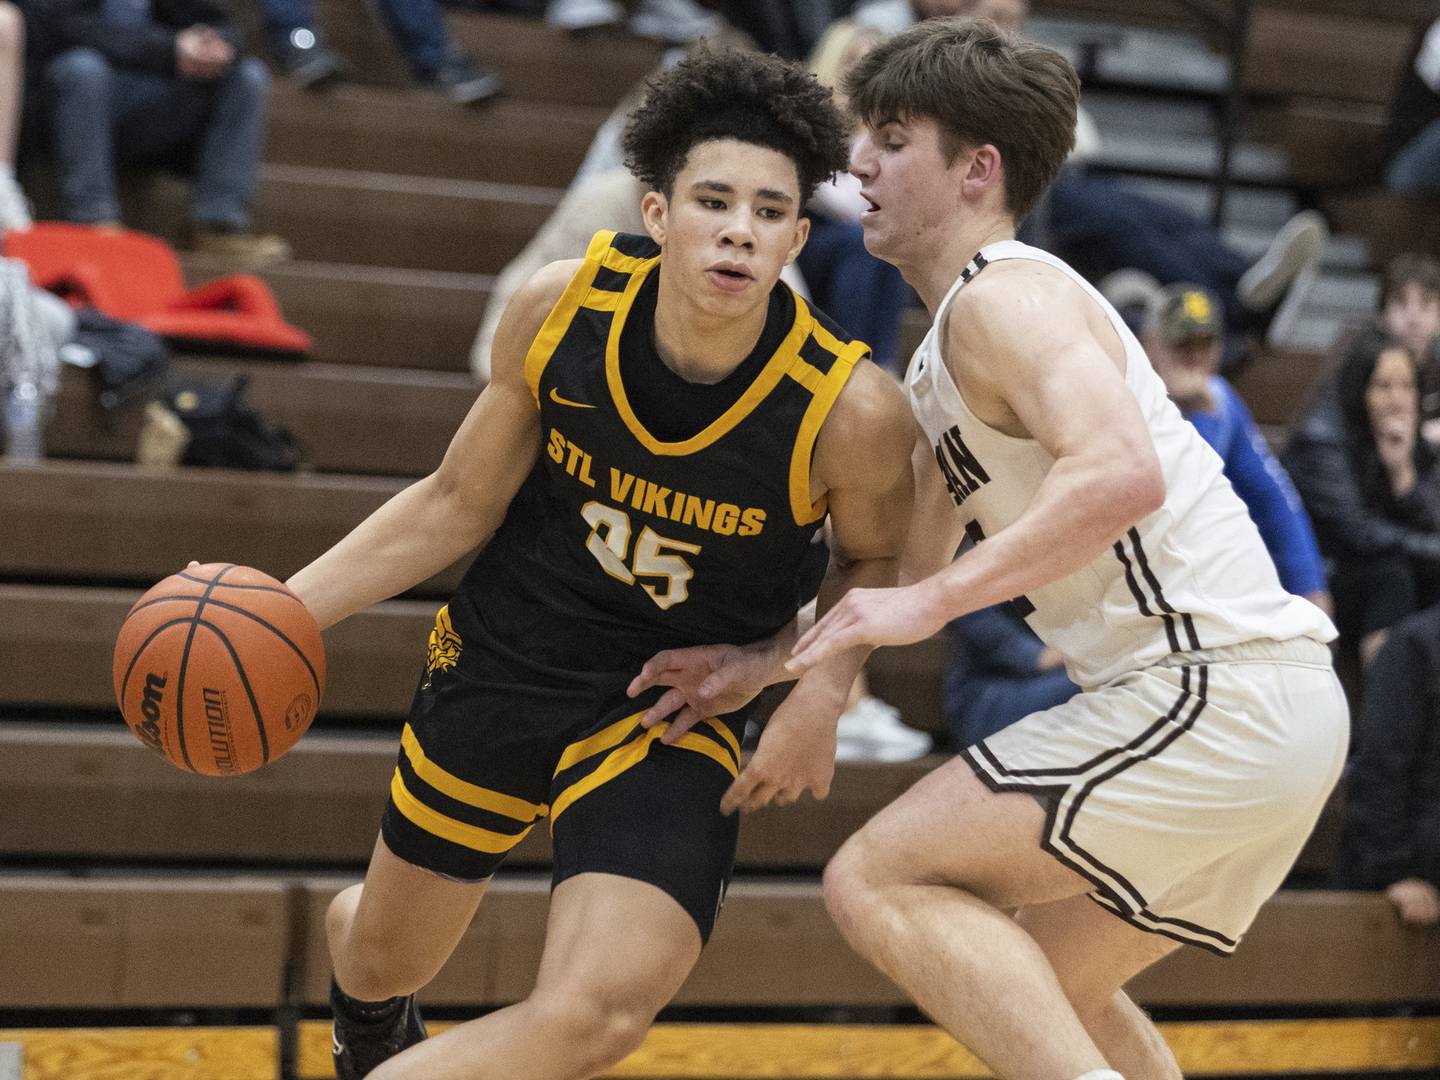 St. Laurence's Jacob Rice (25) tries to drive past Mount Carmel's Richard Zoller during a game in Chicago on Tuesday, Dec. 6, 2022.